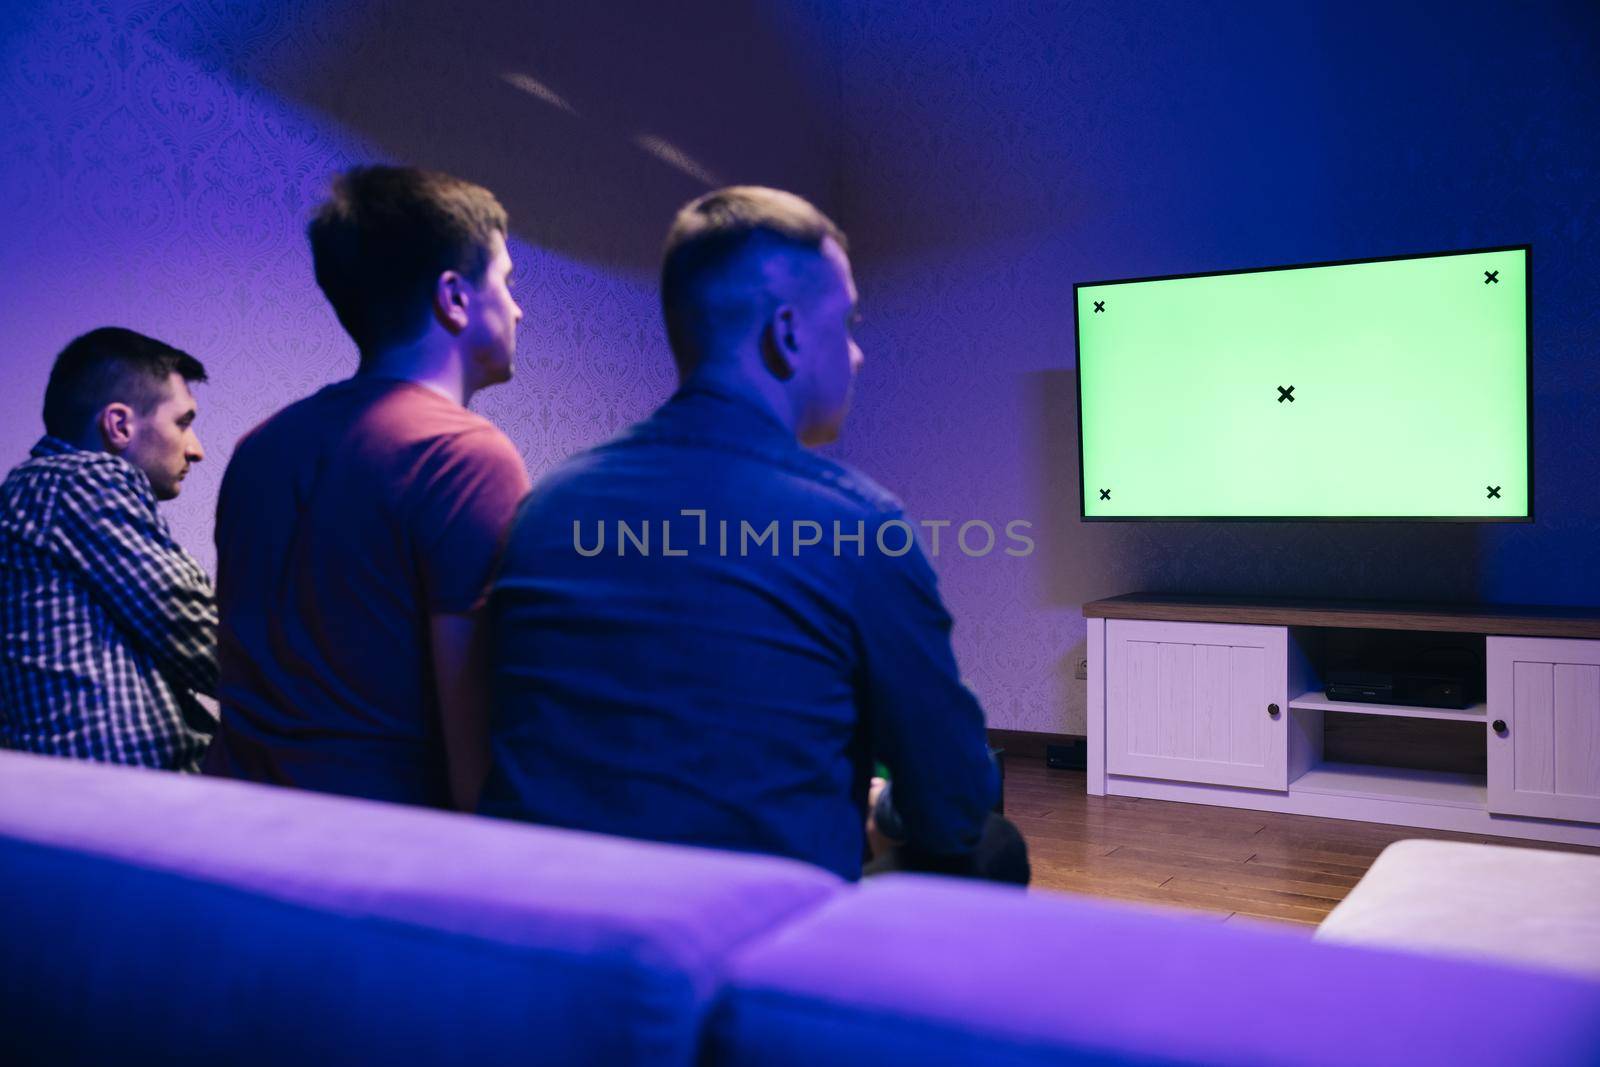 Back Shot of a Gamers Playing and Winning in Online Video Game on His console with Green Chroma Key Screen Personal TV. Cozy Evening at Home.